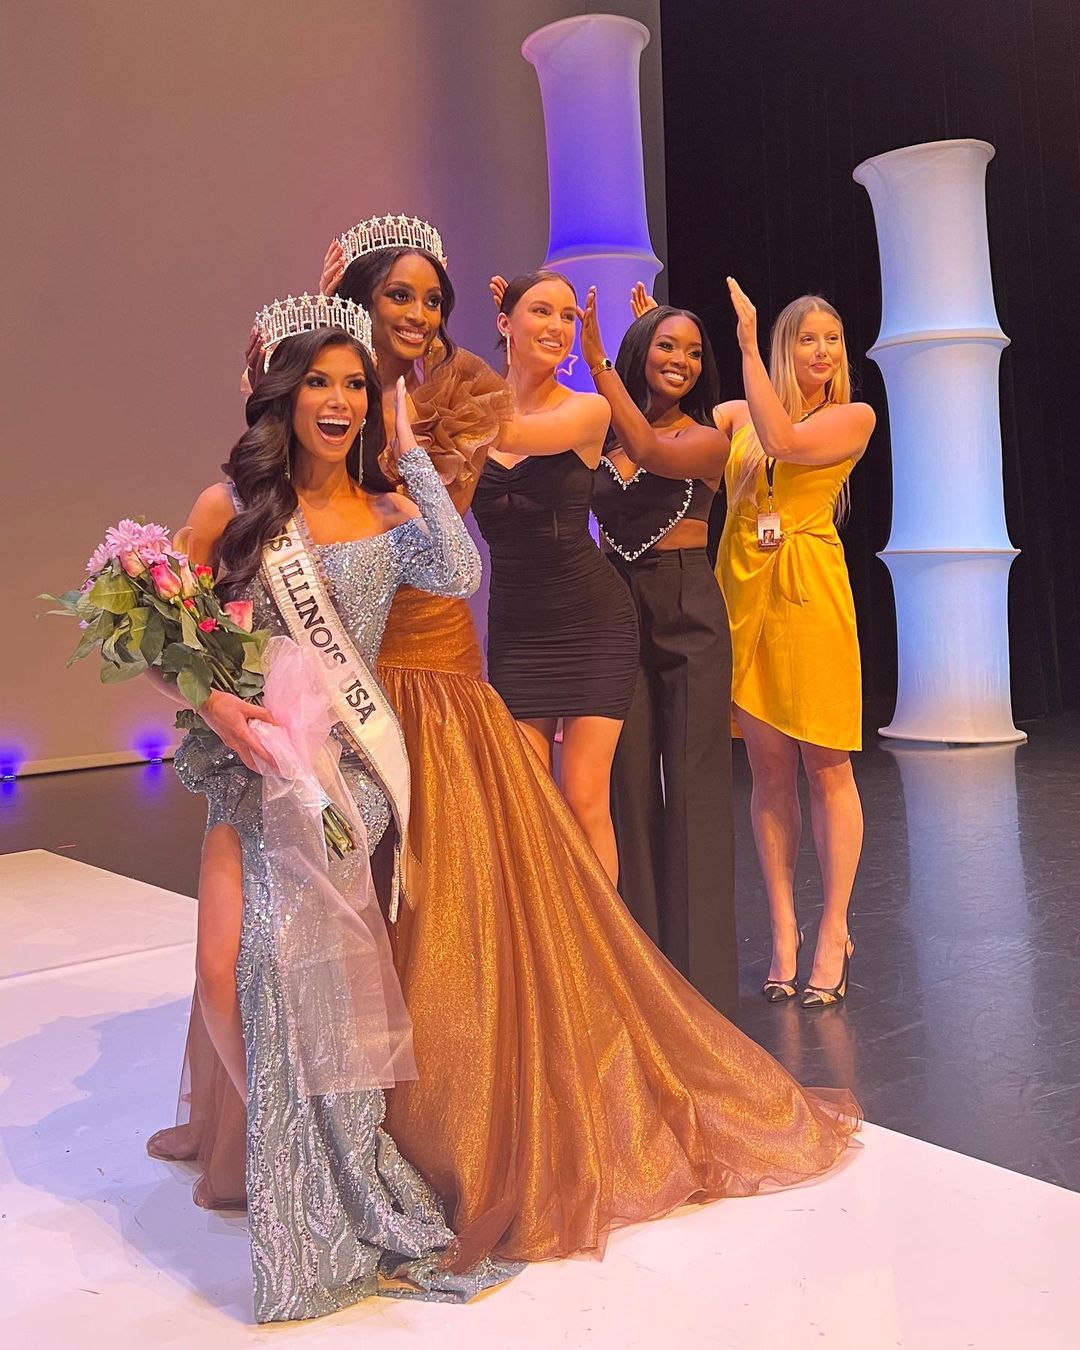 Former titleholders at Miss Illinois USA 2022 • Angel Reyes (2022), Sydni Dion Bennett (2021), Olivia Pura (2020), Whitney Wandland (2017), Renee Wronecki (2015). All five placed at Miss USA.